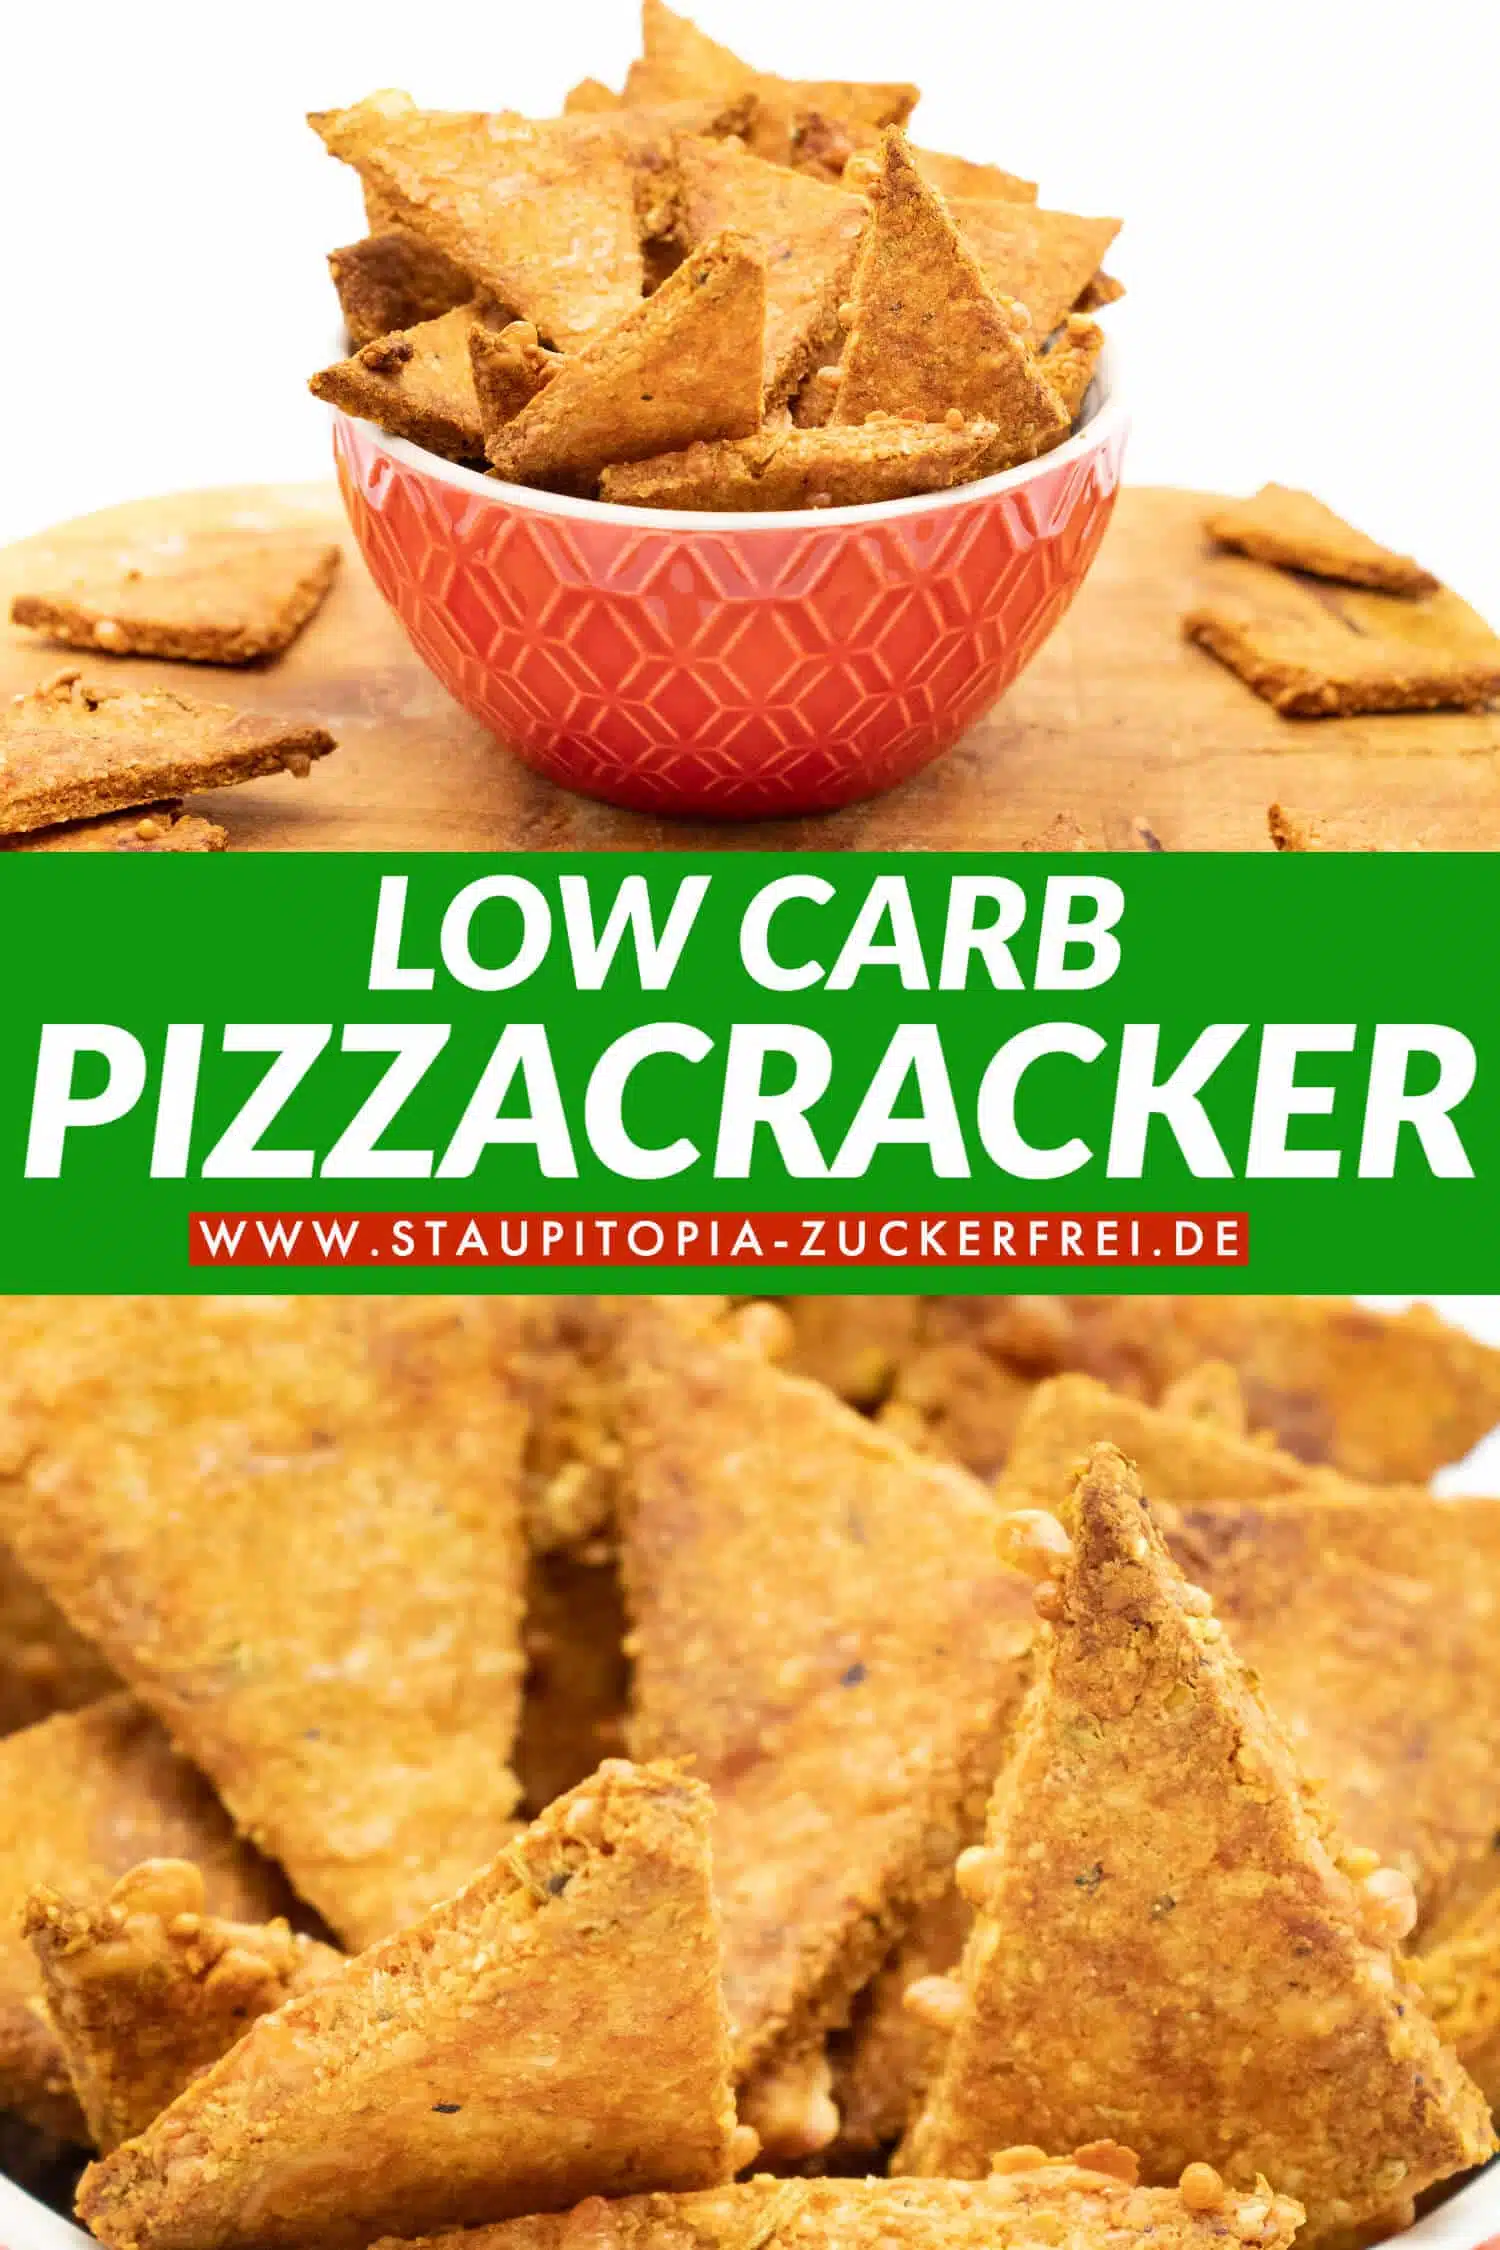 Low Carb Pizza Cracker backen ohne Mehl